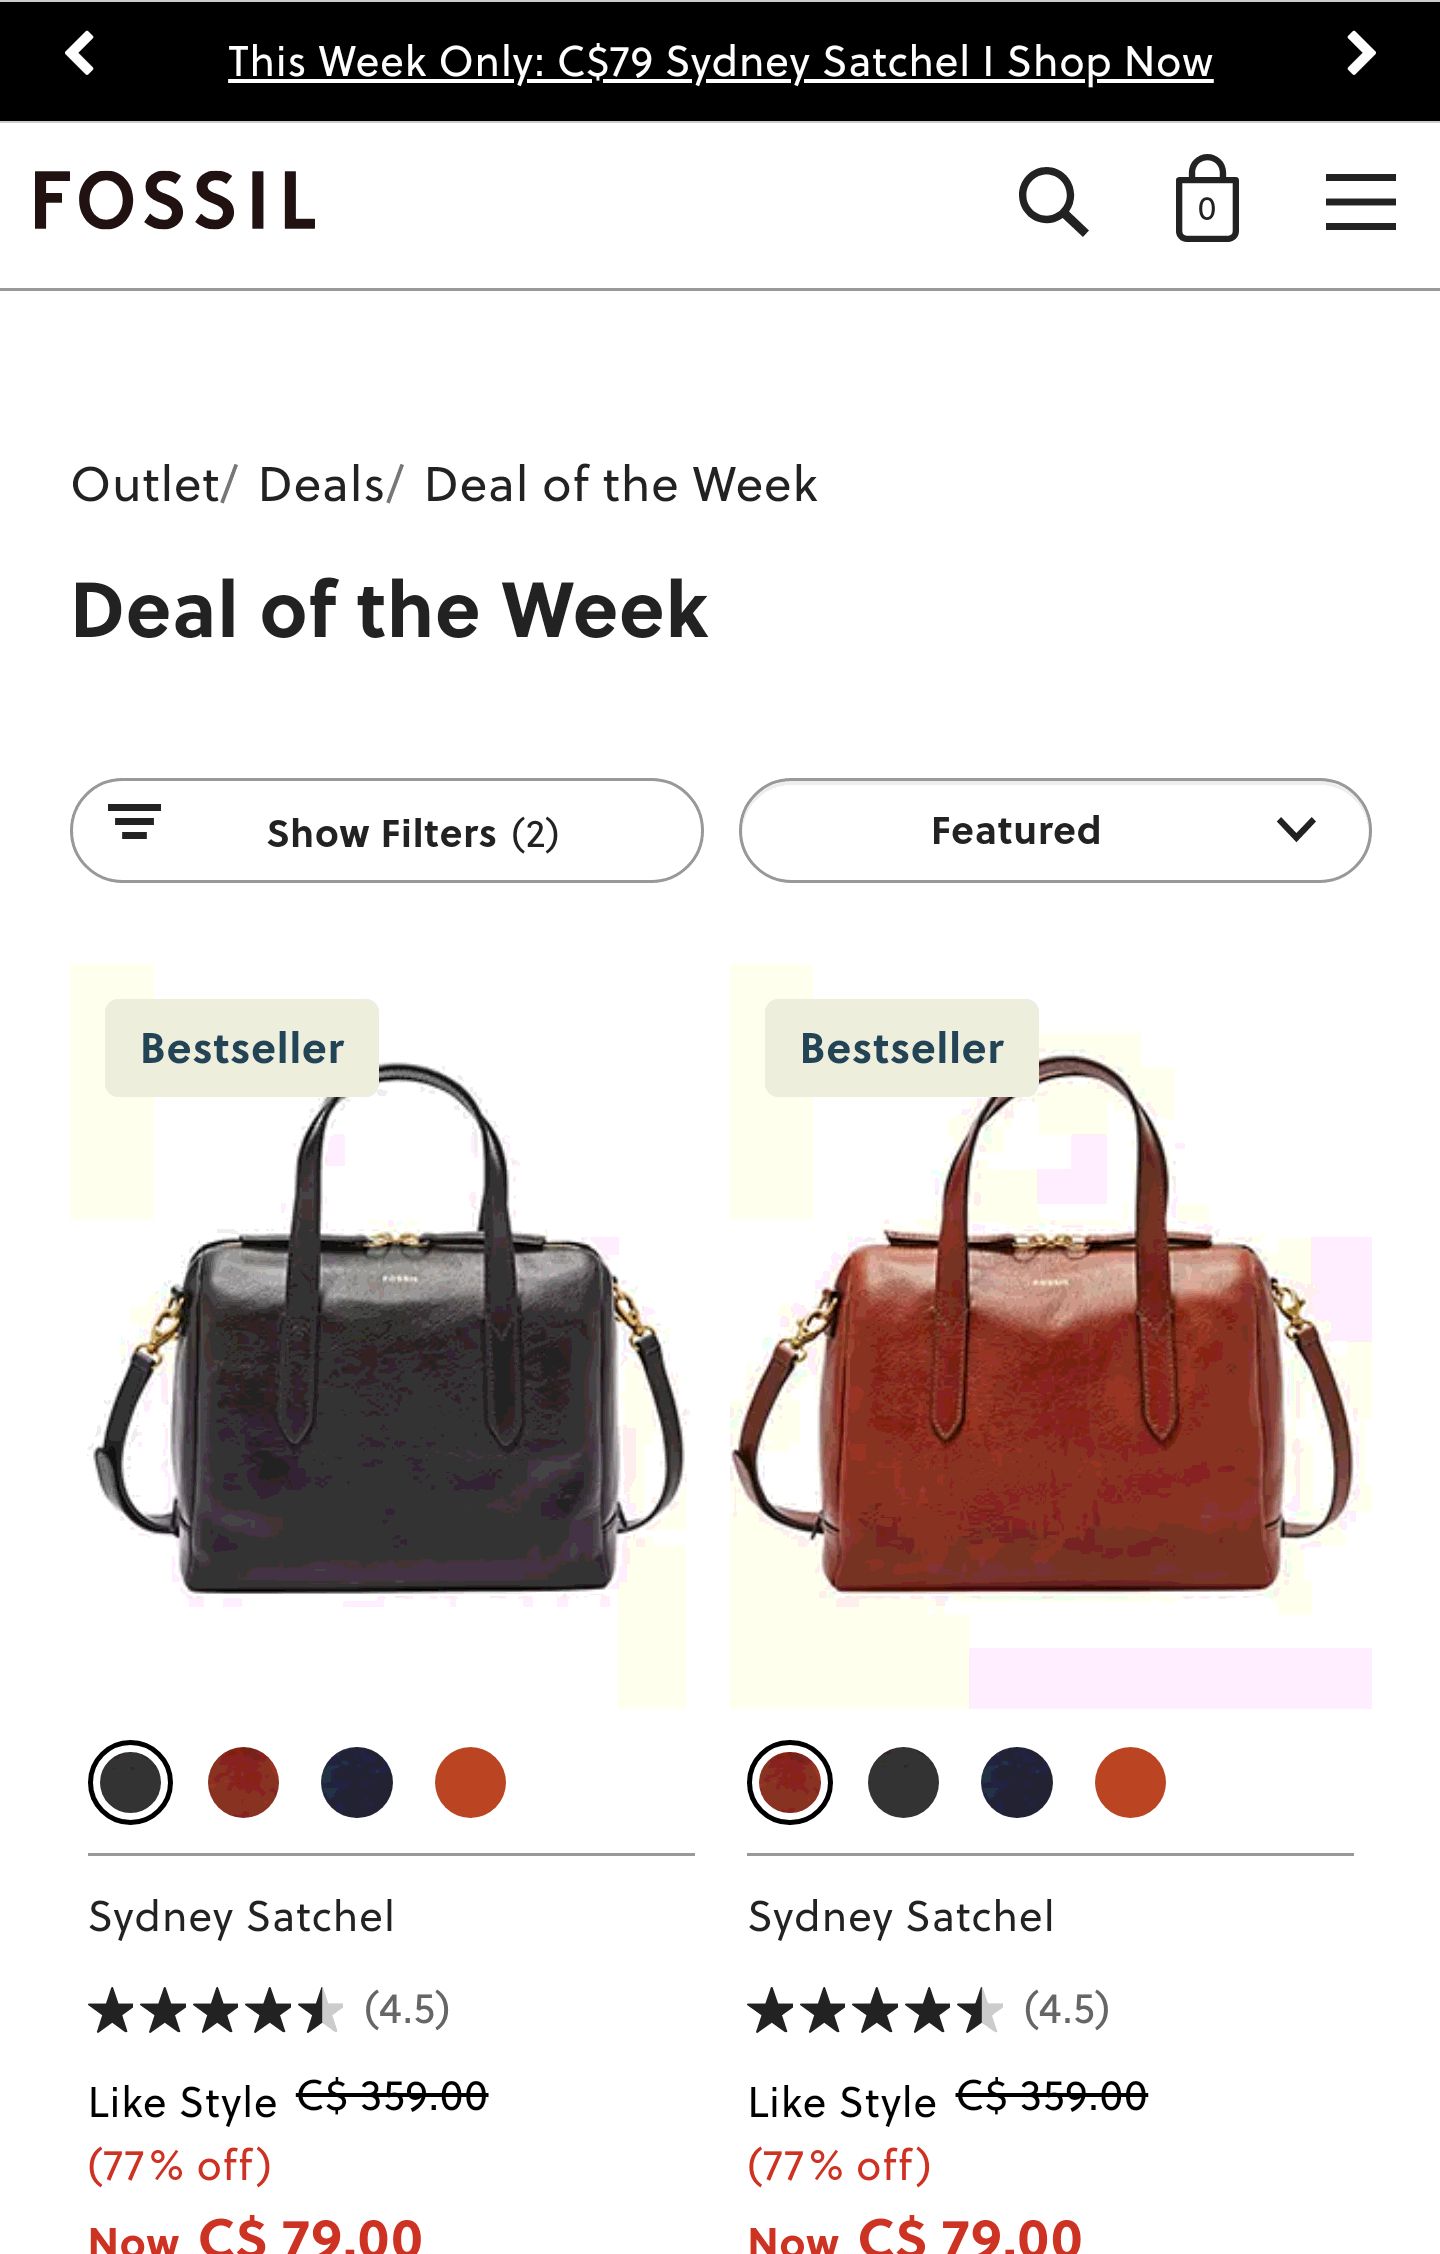 Deal of the Week - Fossil Sydney Satchel